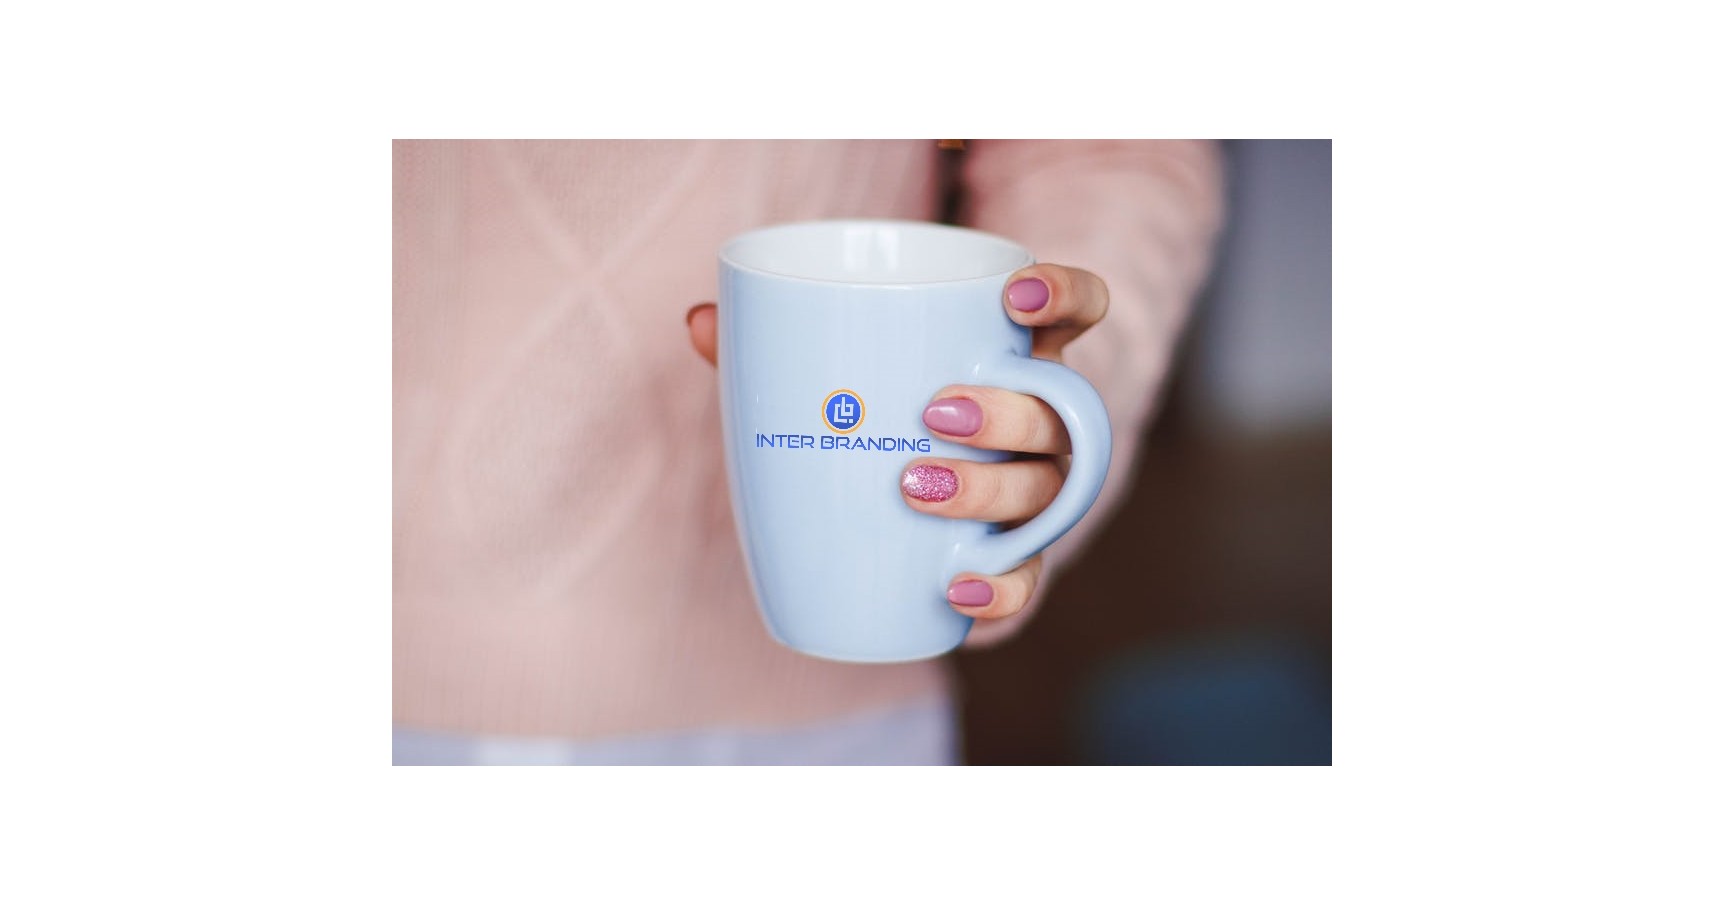 Why Promotional Coffee Mugs Make Great Giveaways